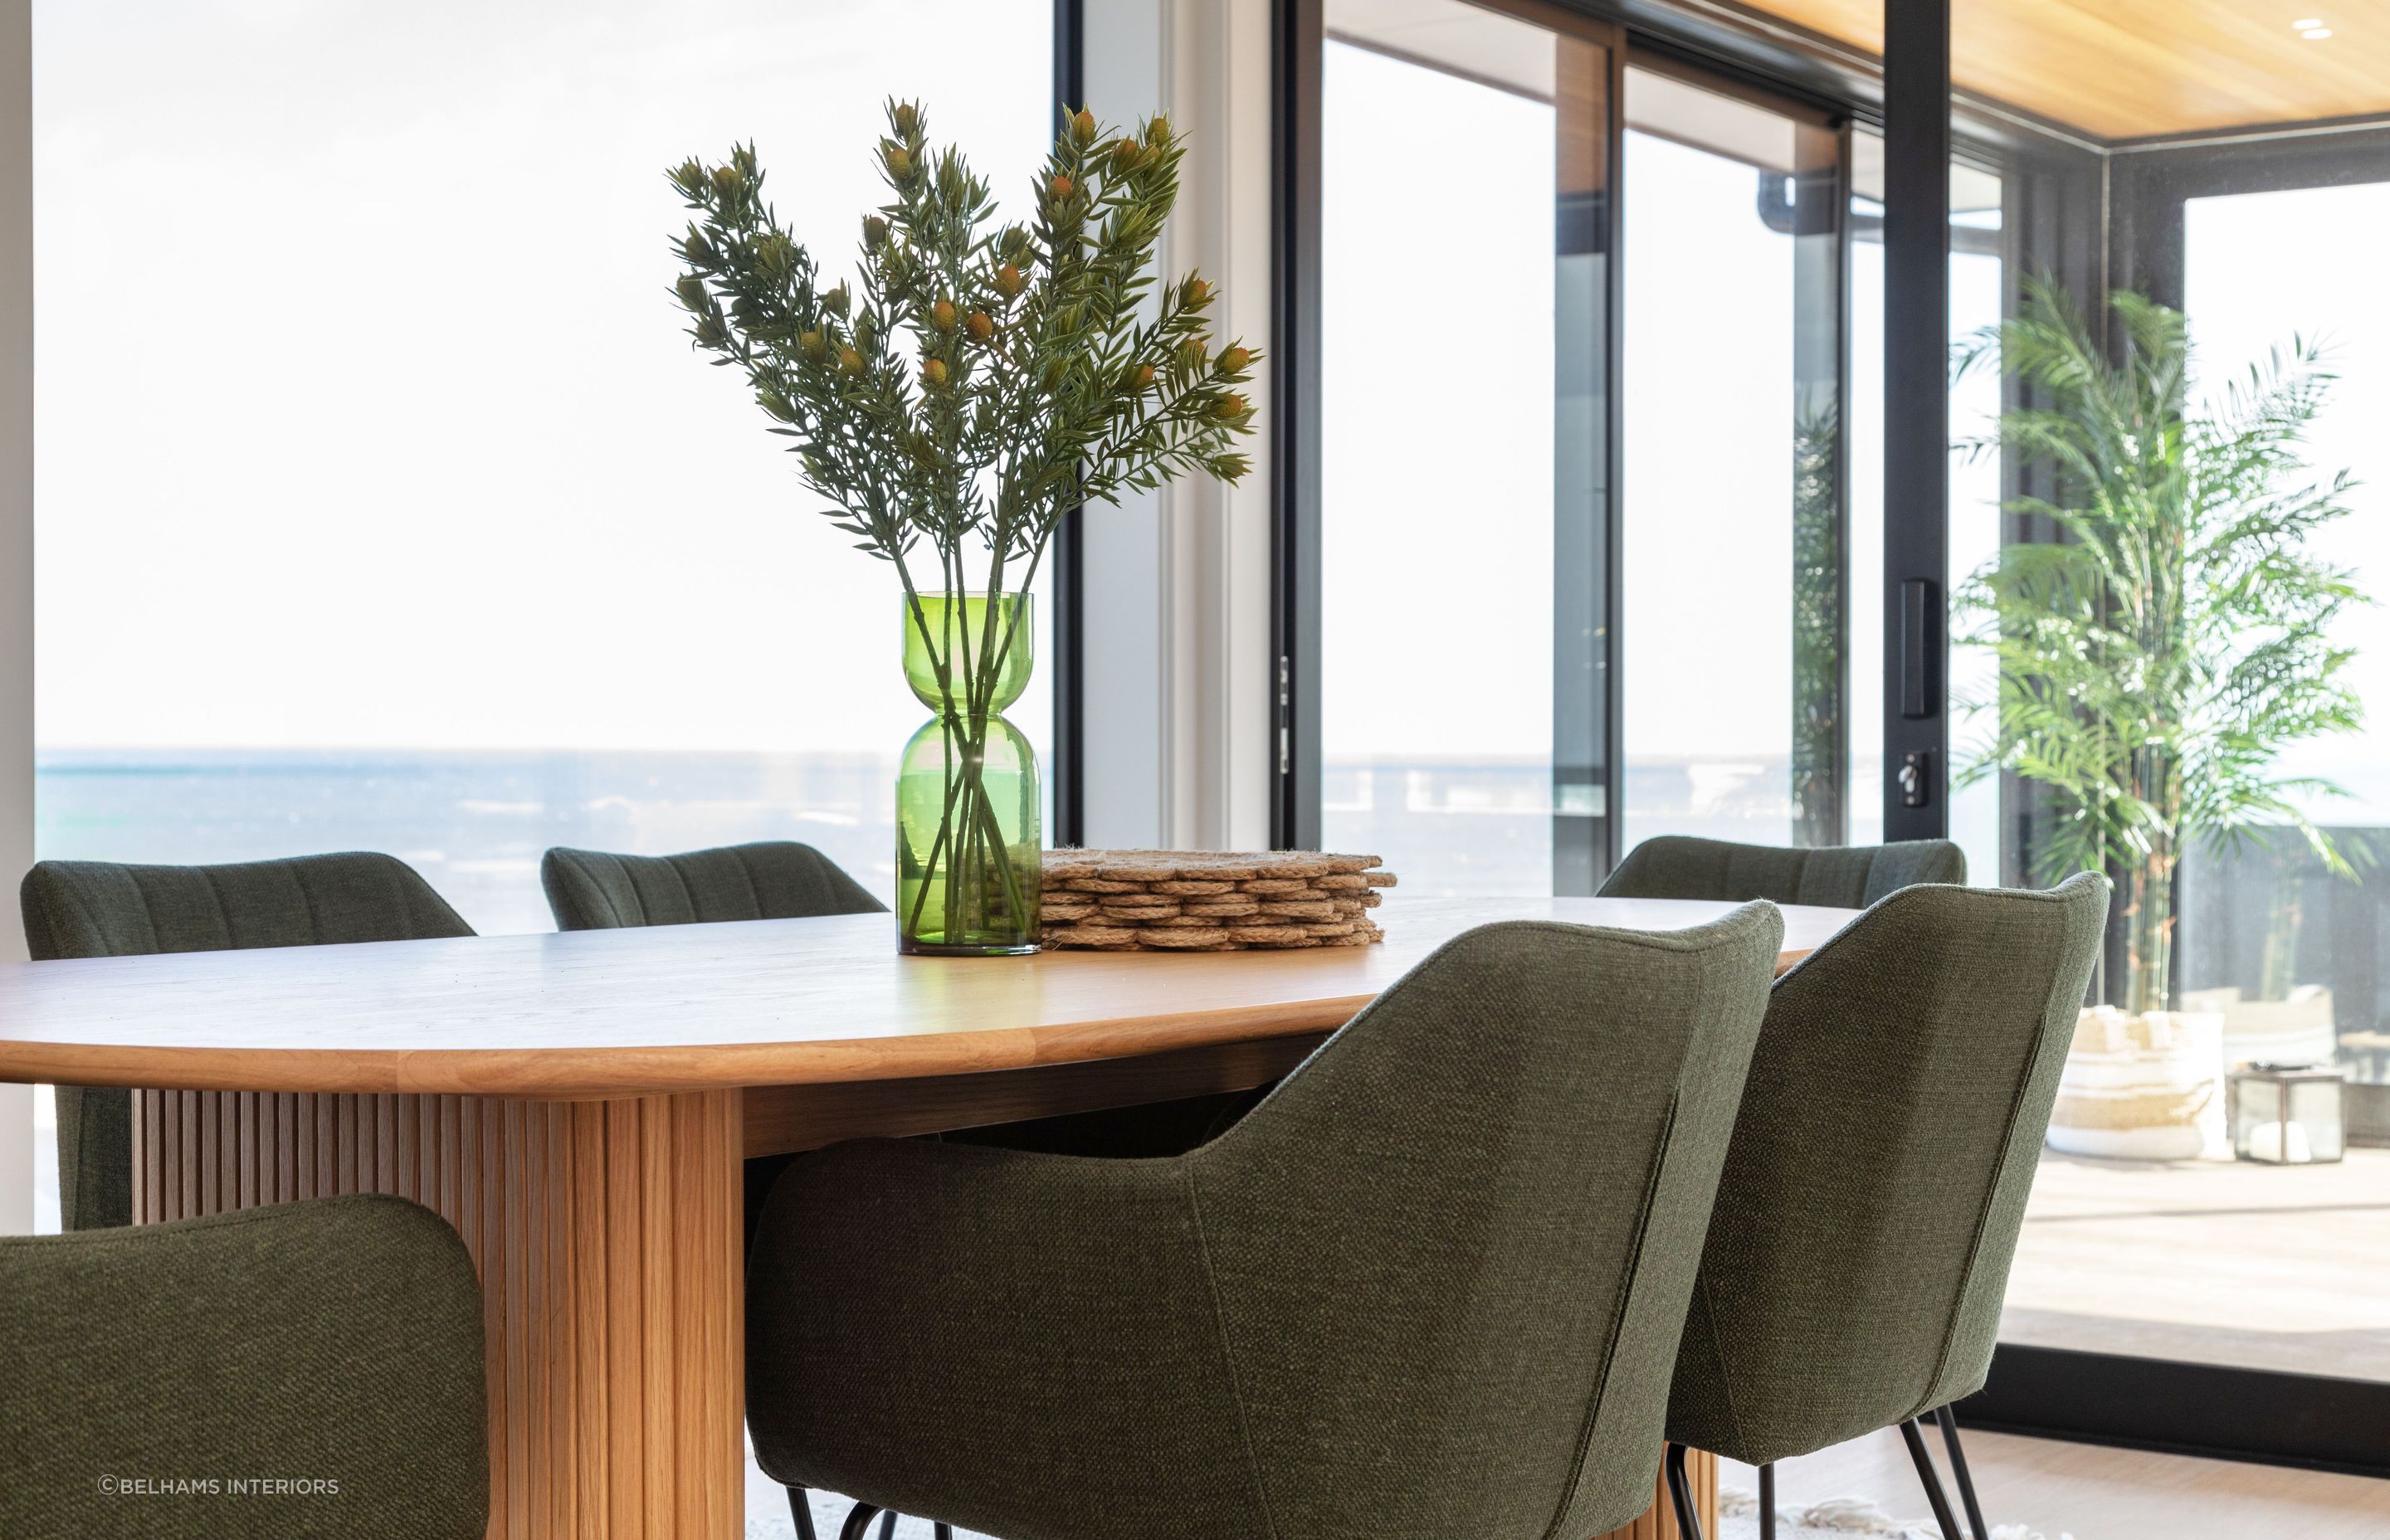 Dining setting with a view. A large family sized dining table was a must for this home with an open plan designed for social gatherings. Photographer - Sandra Henderson.